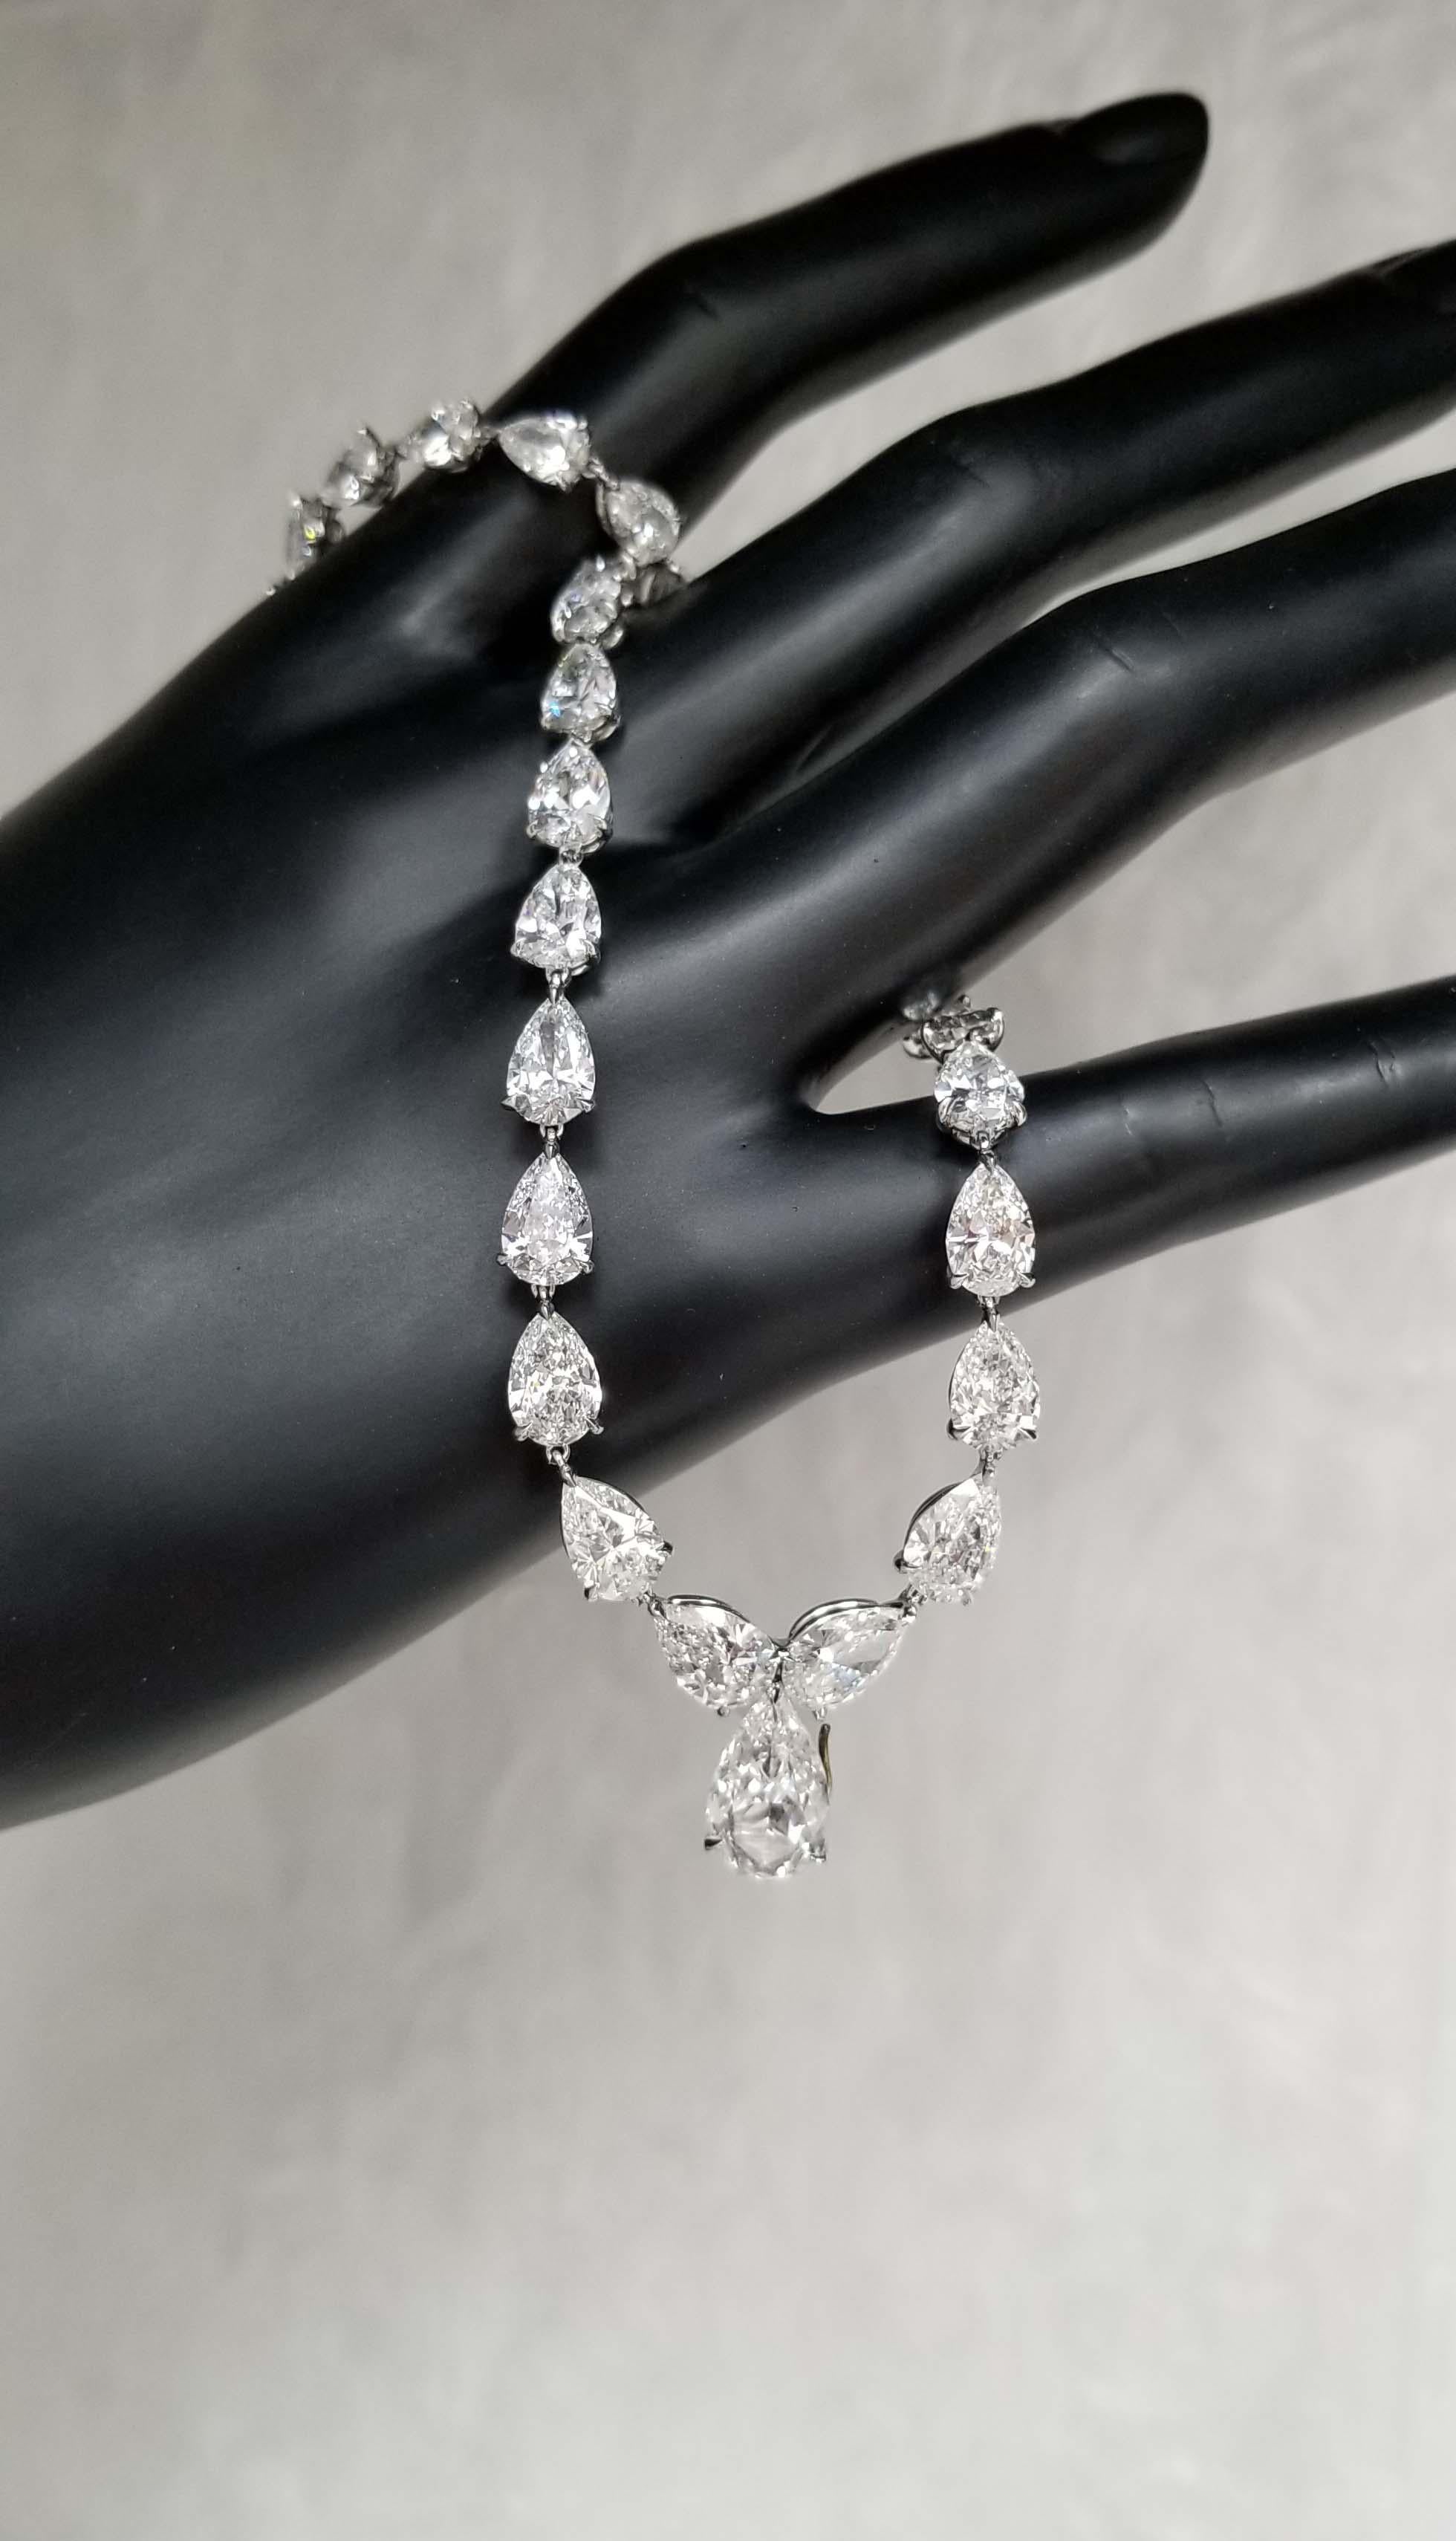 Scarselli features this enchanting 31.27 carats pear cut diamond tennis necklace in Platinum. Each diamond is GIA certified total of 45 pear-cut diamonds from 0.35ct to 2.08ct the biggest, D-E-F color (One diamond graded G) clarity VVS-SI.
This